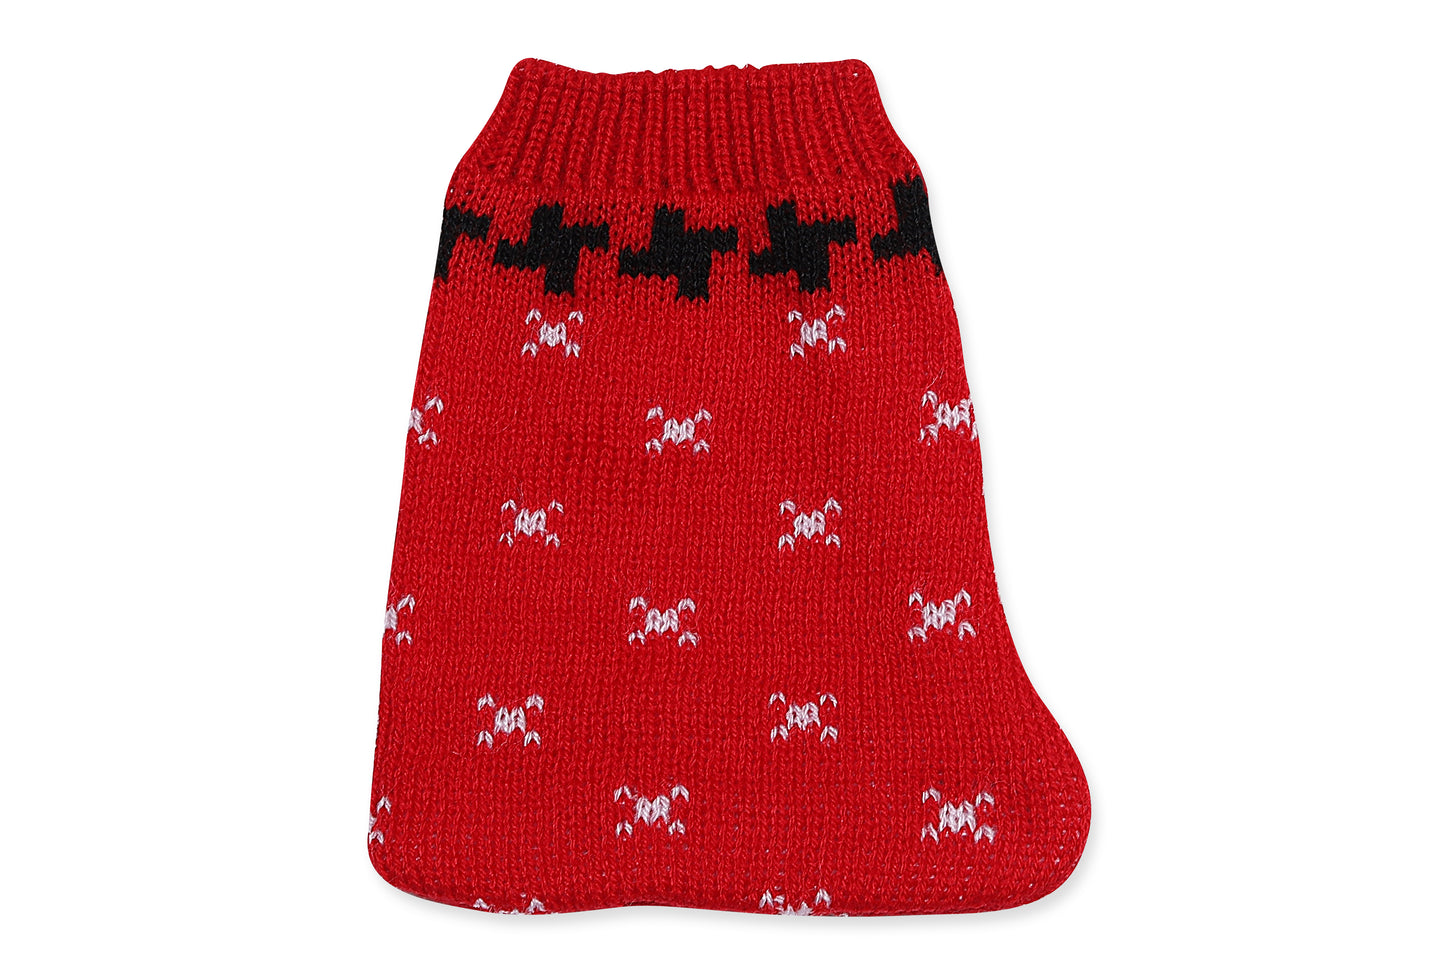 Baby Knitted Sweater, Leggings, Cap & Booties Full Suit- ABC 123 (4 Pcs) Red